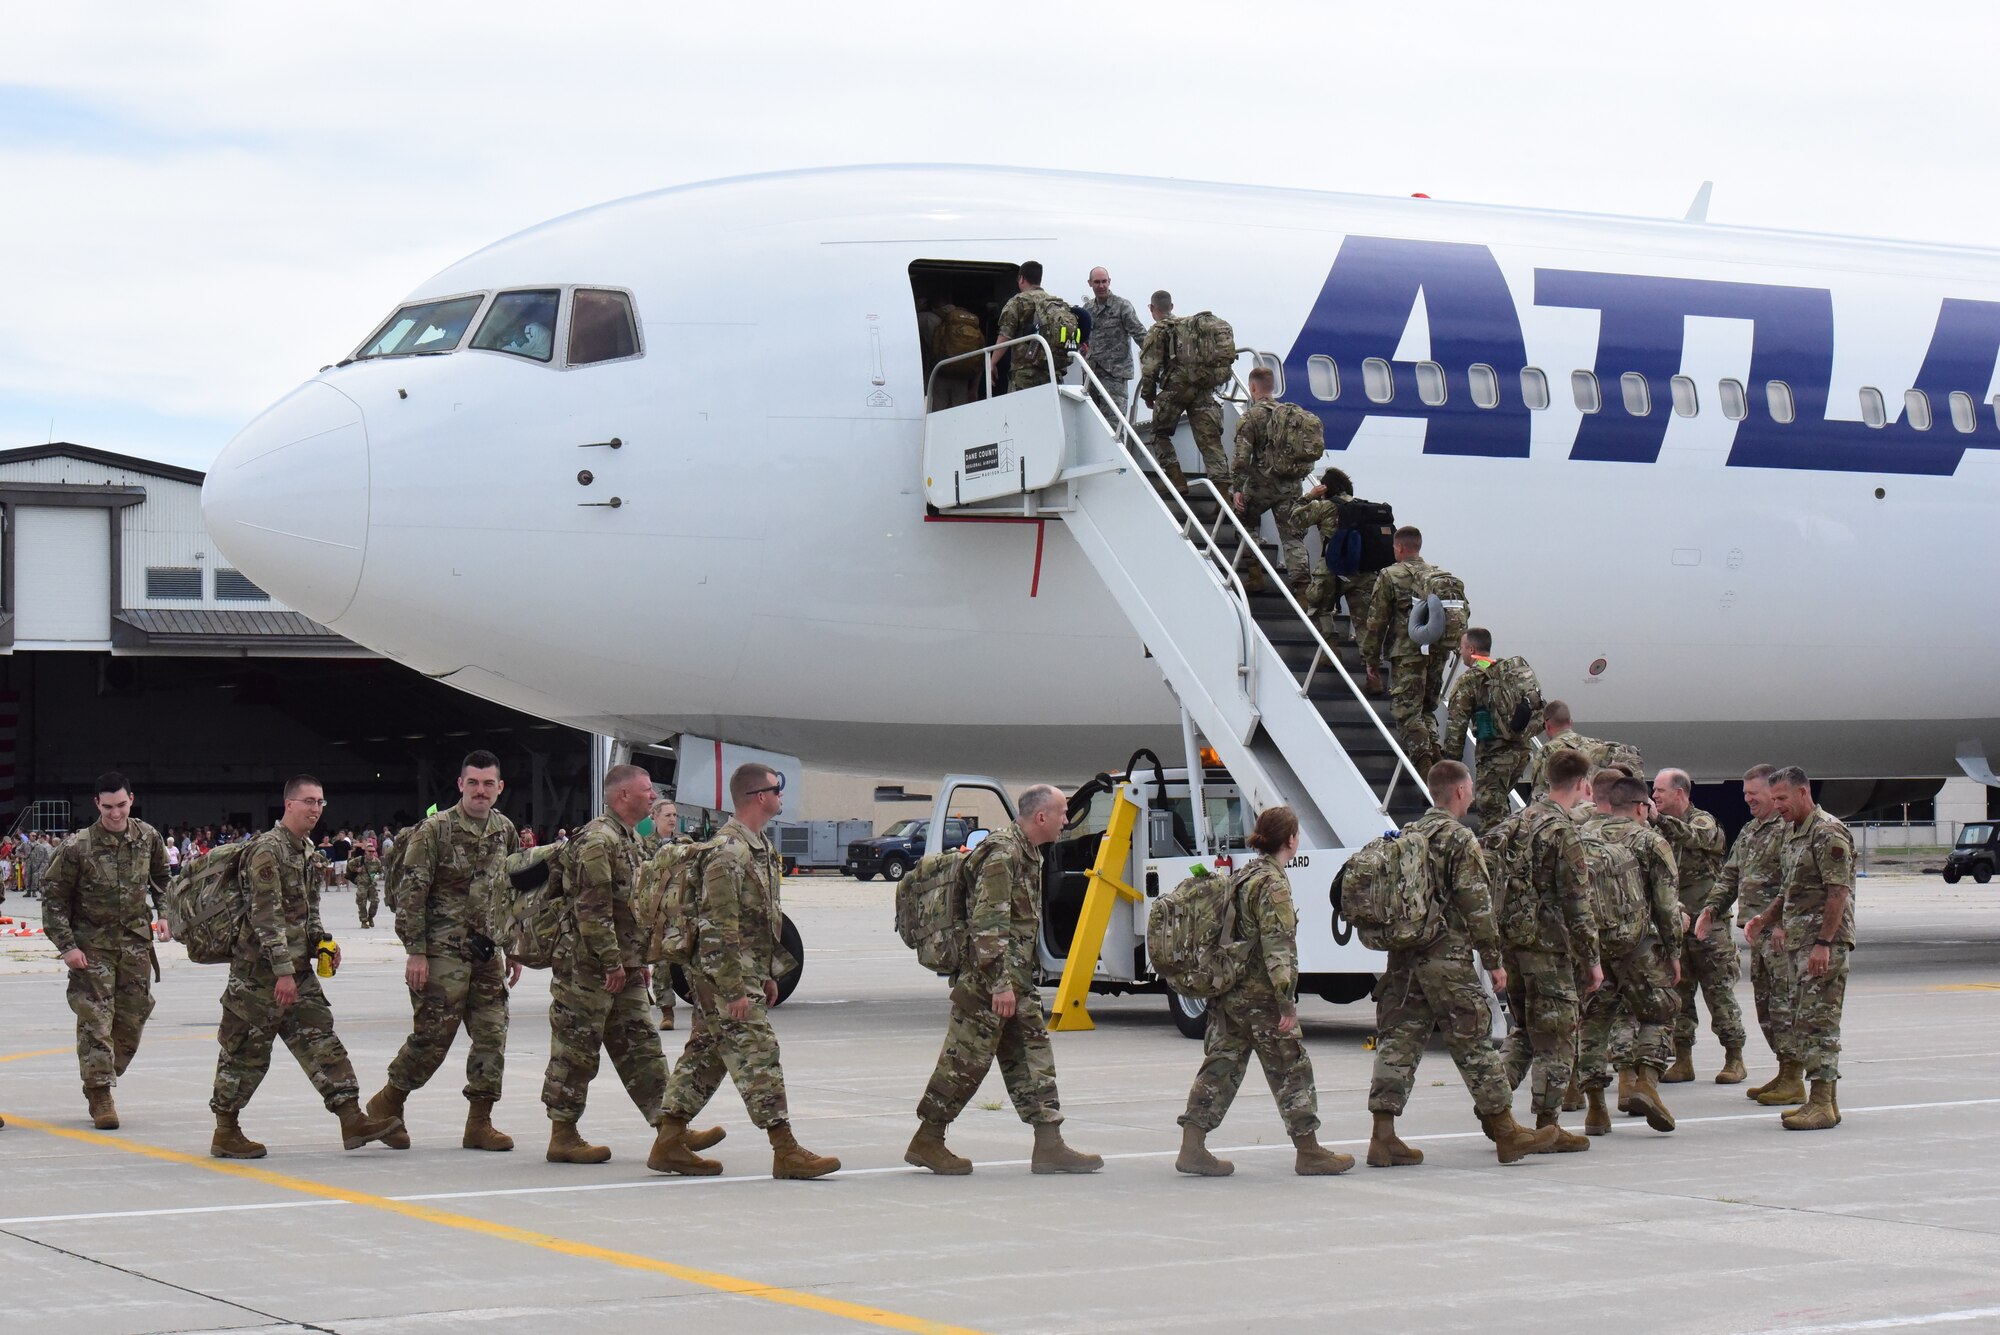 Airmen from the 115th Fighter Wing board a Boeing 767 aircraft after a send off ceremony held at Truax Field, Madison, Wis. on July 21, 2019.  The 115th Fighter Wing deployed approximately 300 personnel and a number of aircraft to Afghanistan in support of Operation Freedom Sentinel and NATO's Resolute Support. (U.S. Air National Guard photo by Staff Sgt. Kyle Russell)